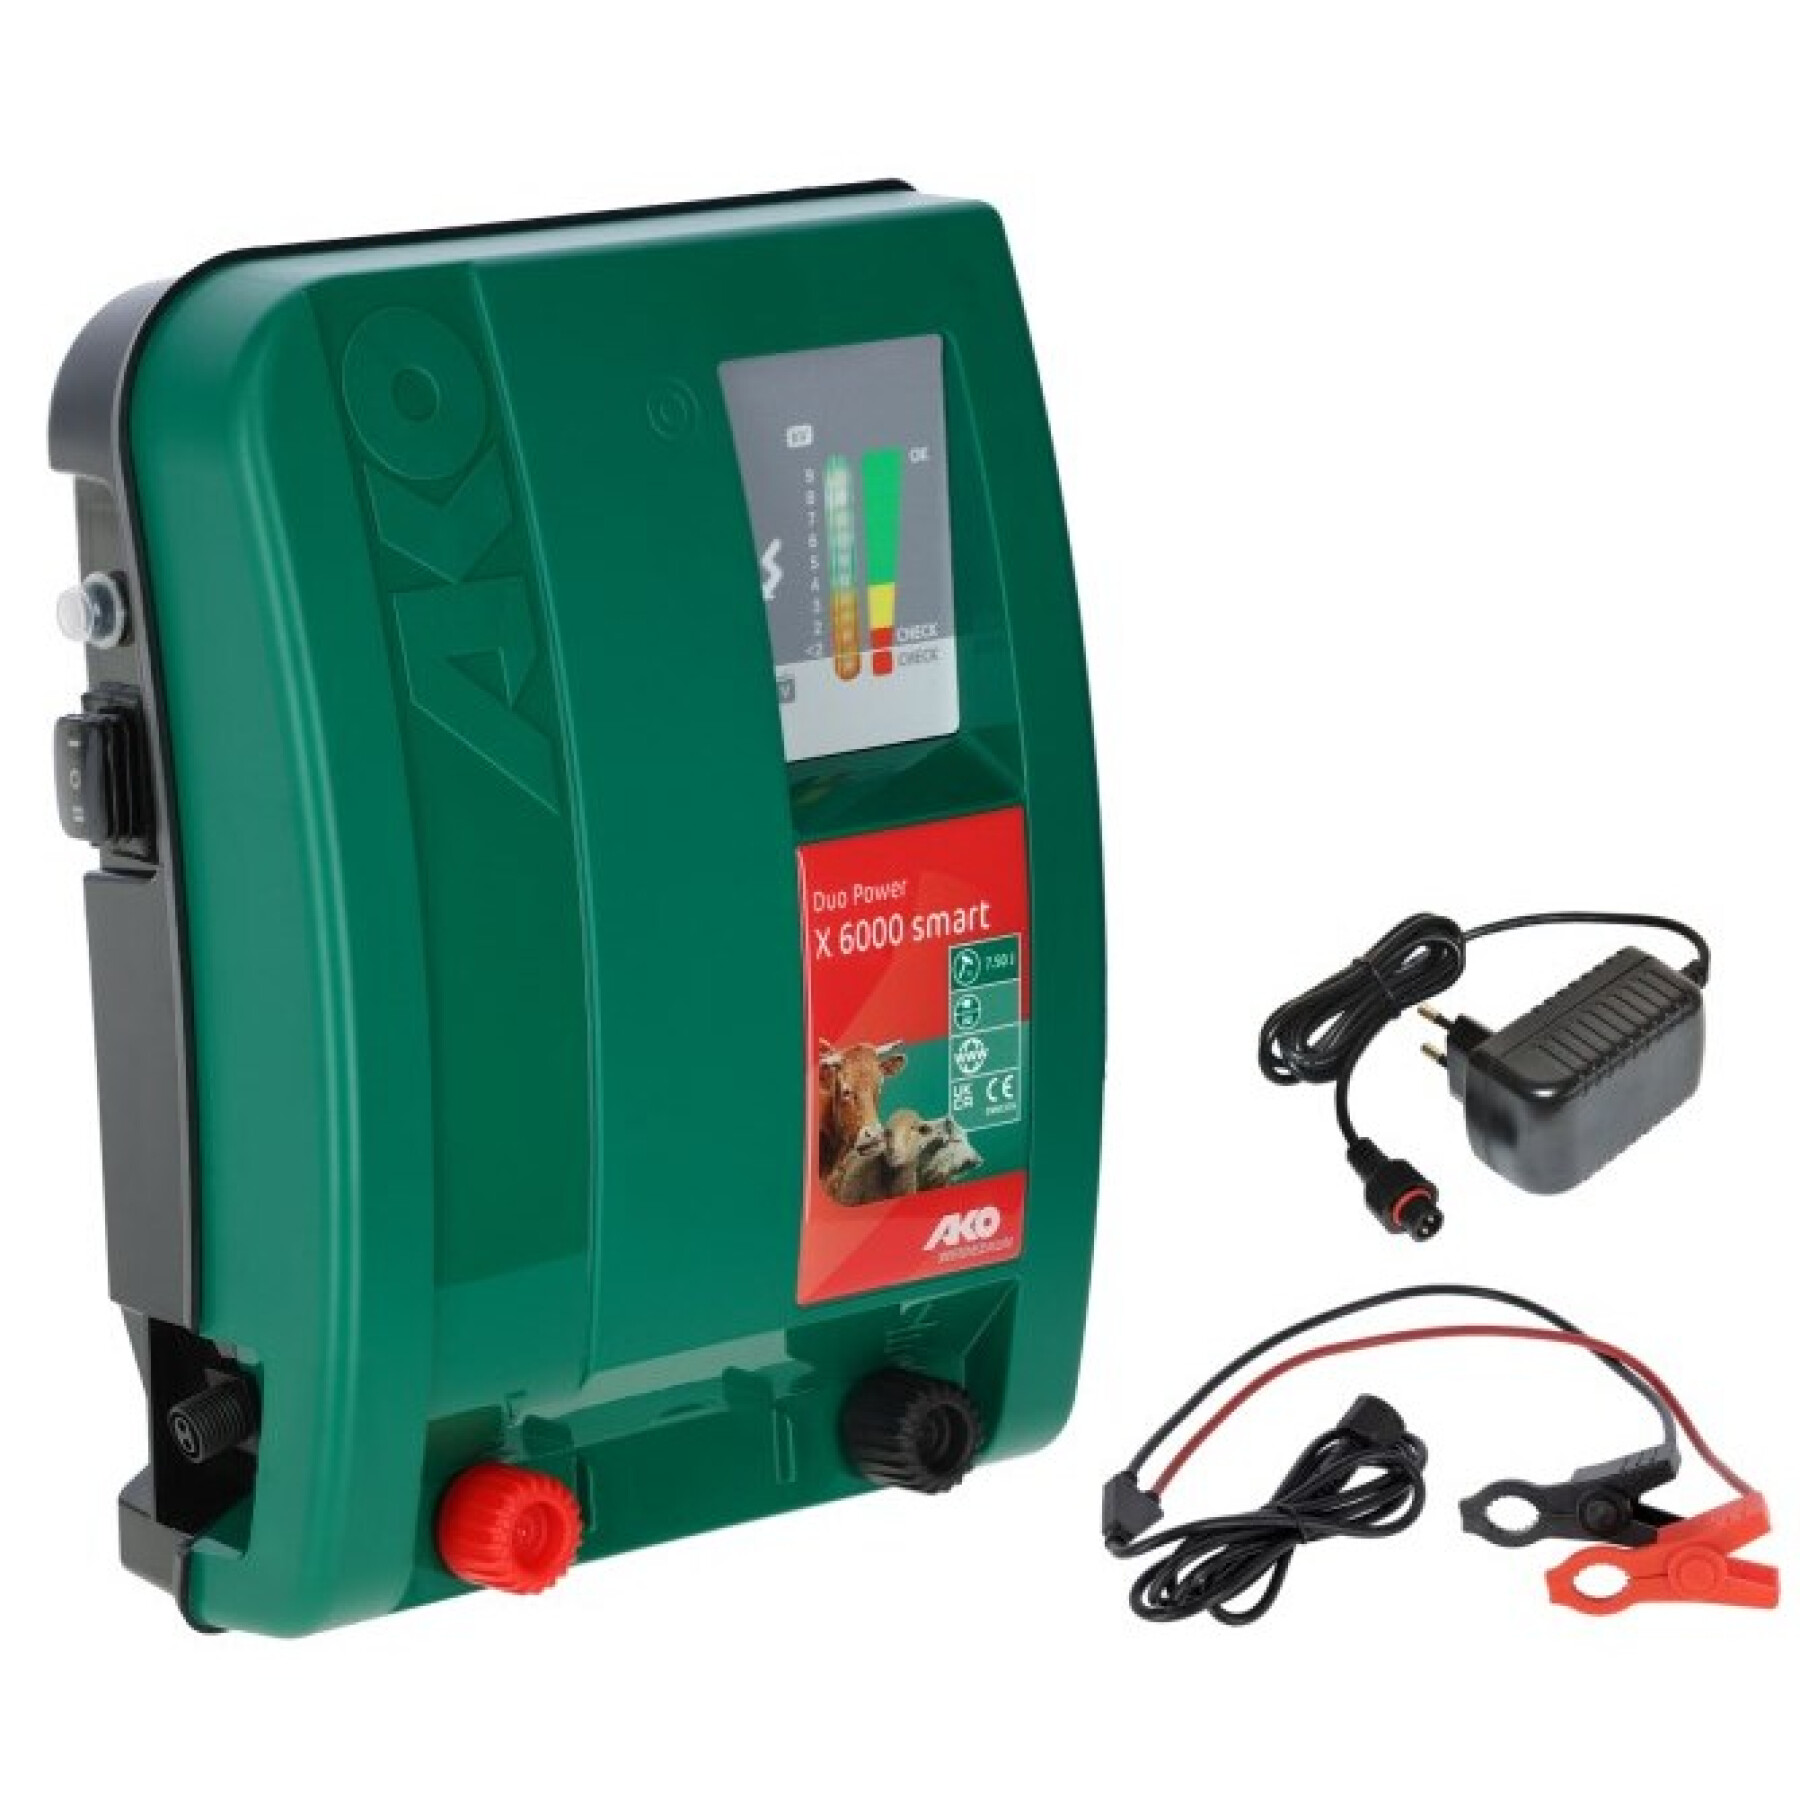 Generator for electric fence Ako Duo Power X6000 Smart